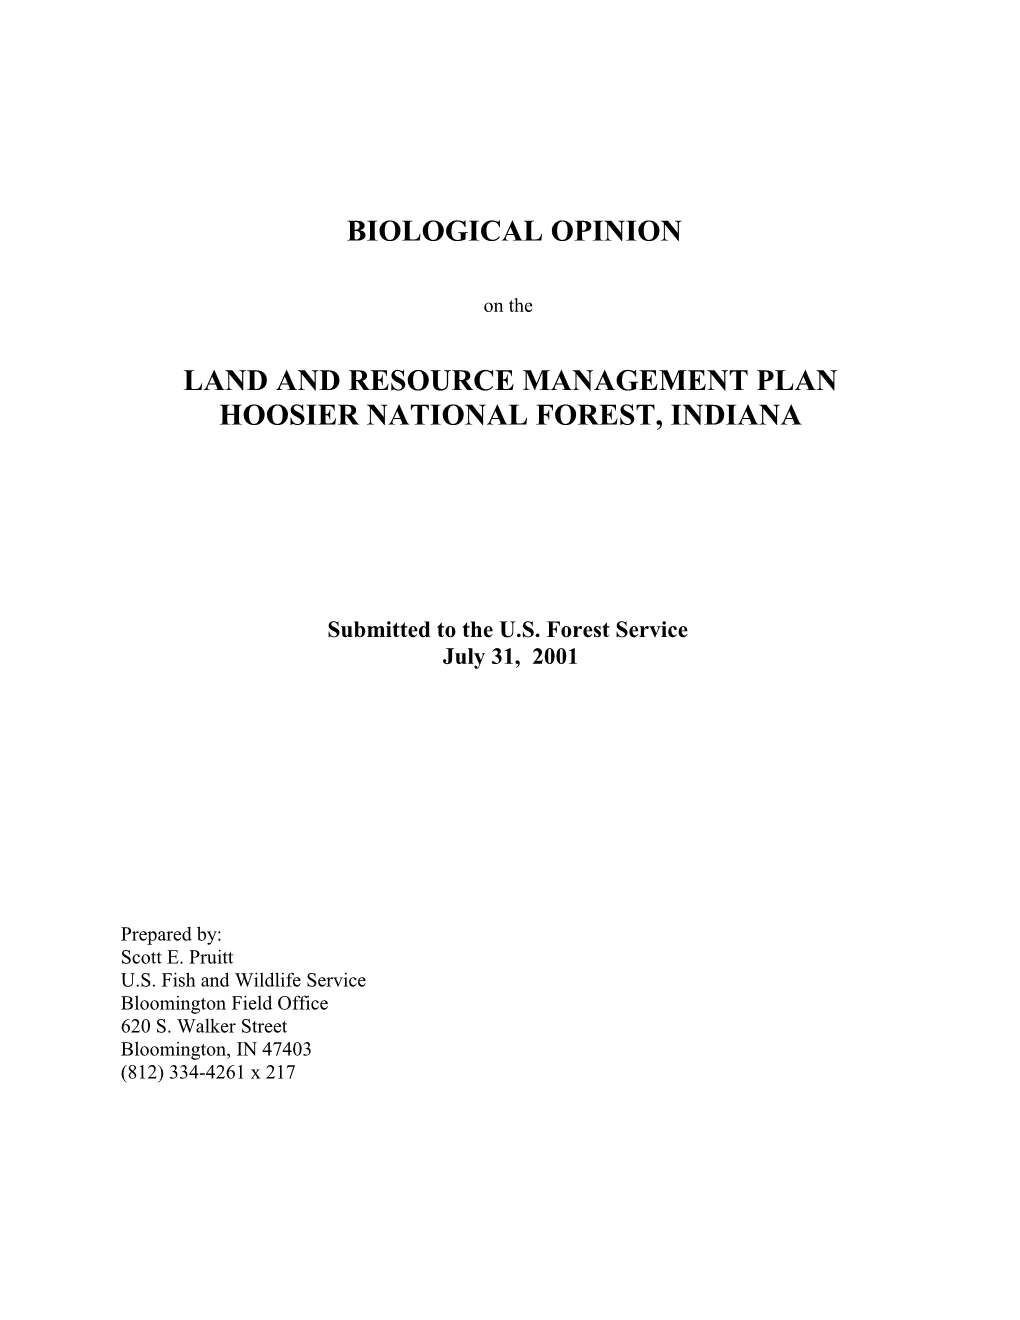 Land and Resource Management Plan Hoosier National Forest, Indiana